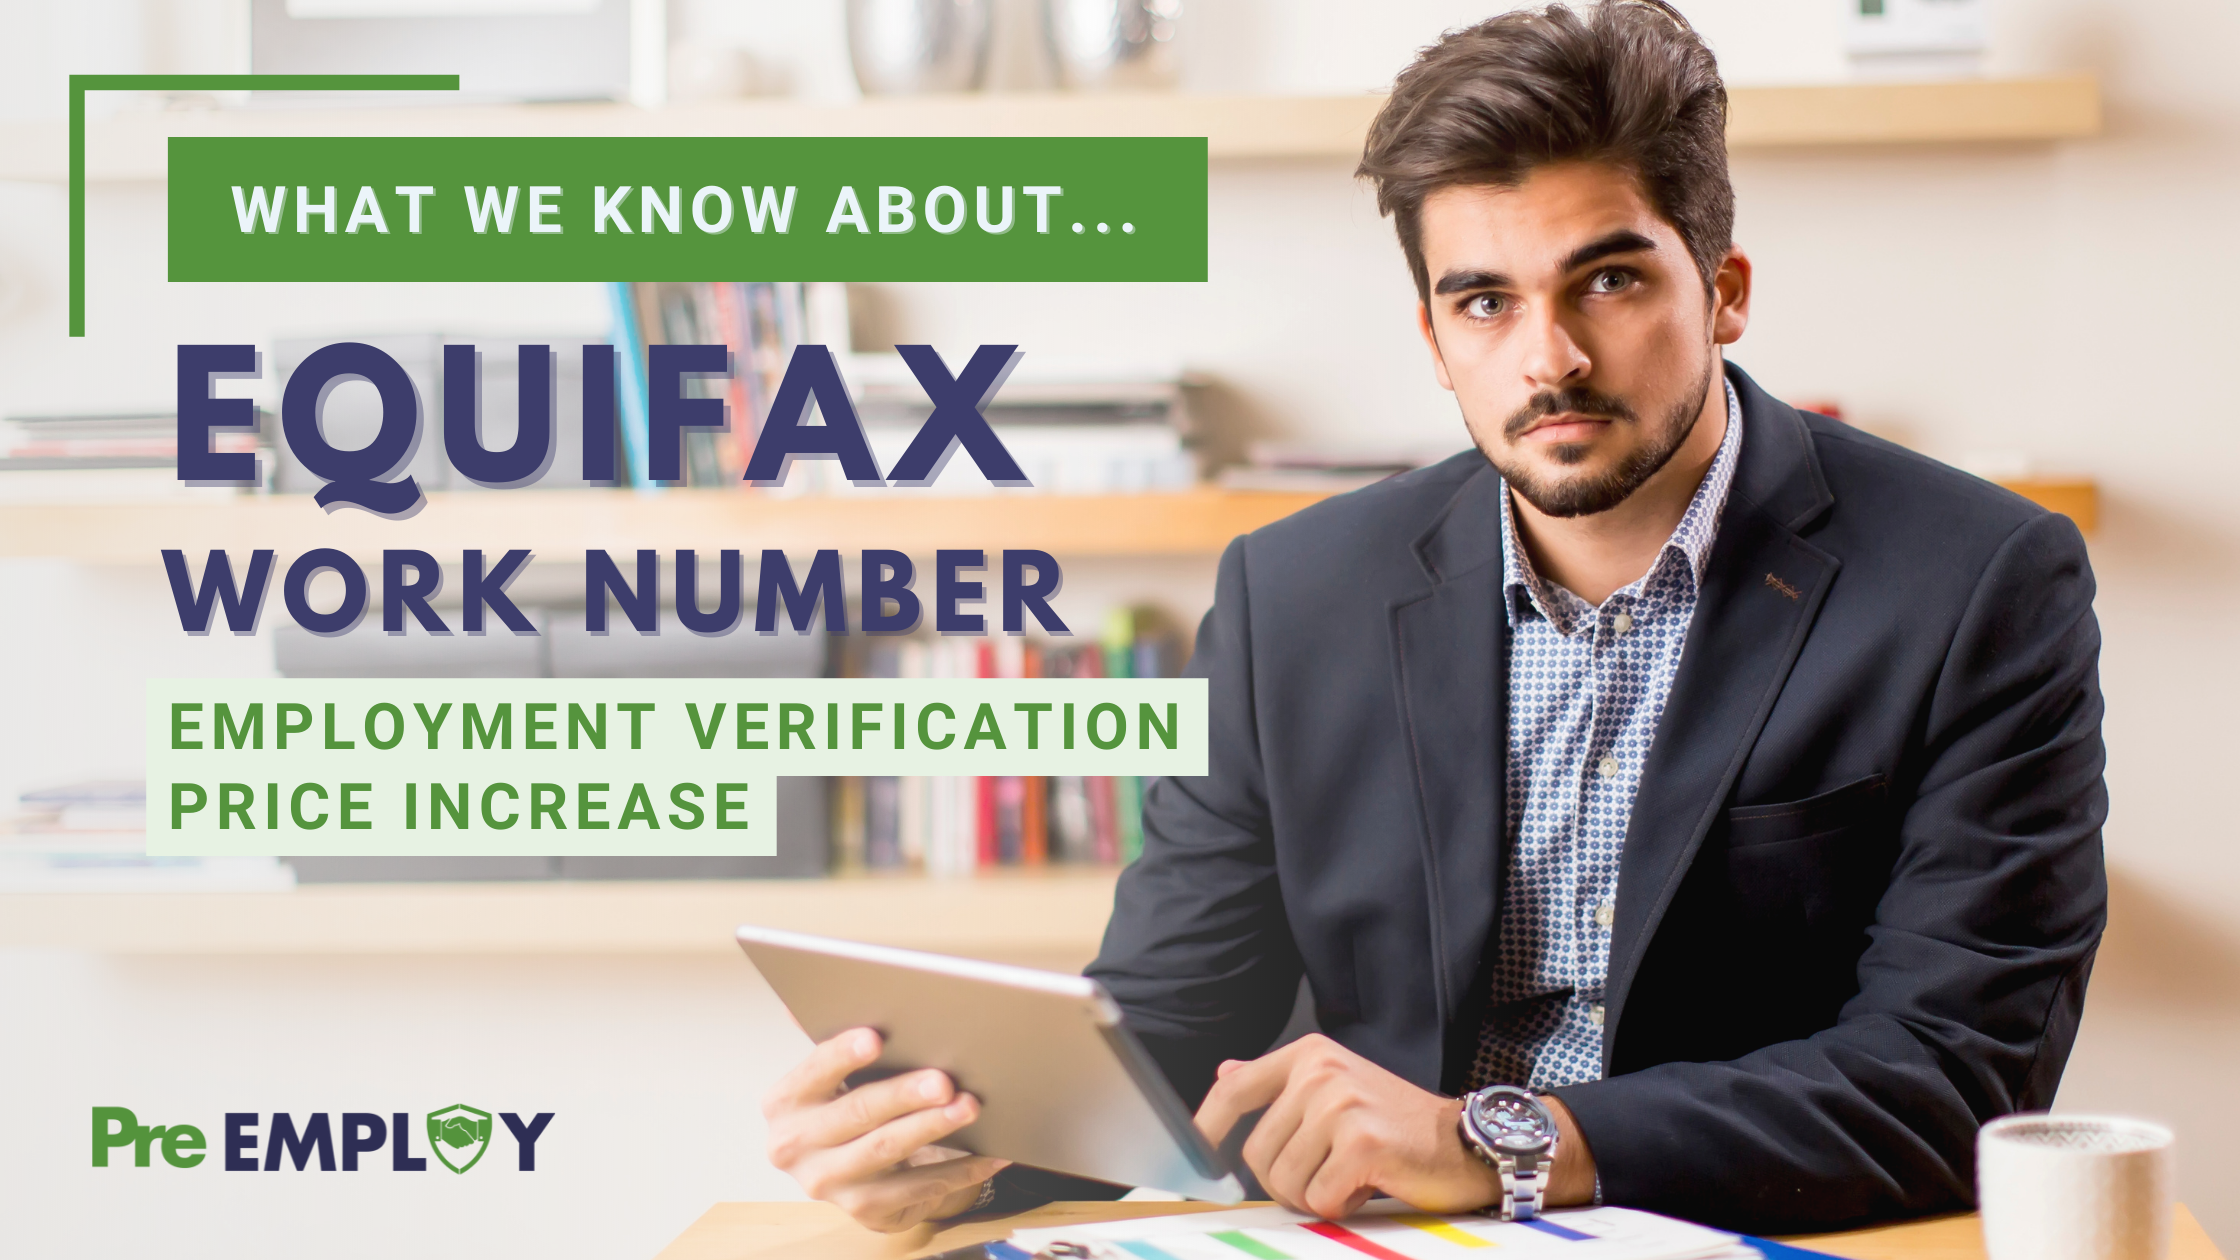 PAGE What We Know About Equifax’s Work Number Employment Verification Price Increase